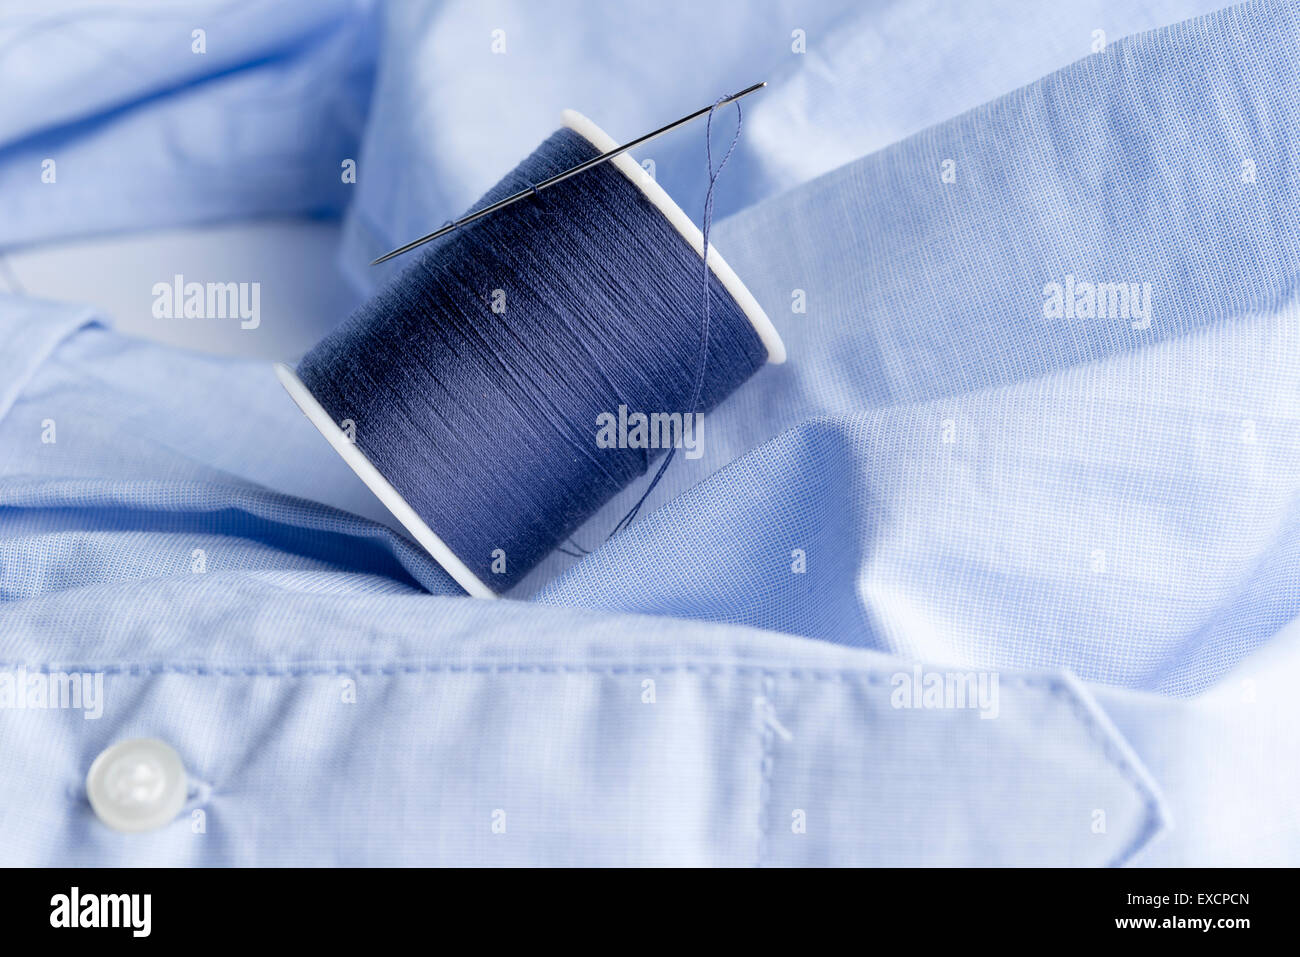 spool of navy blue silk cotton sewing tread  and a needle laying on light blue material. Stock Photo